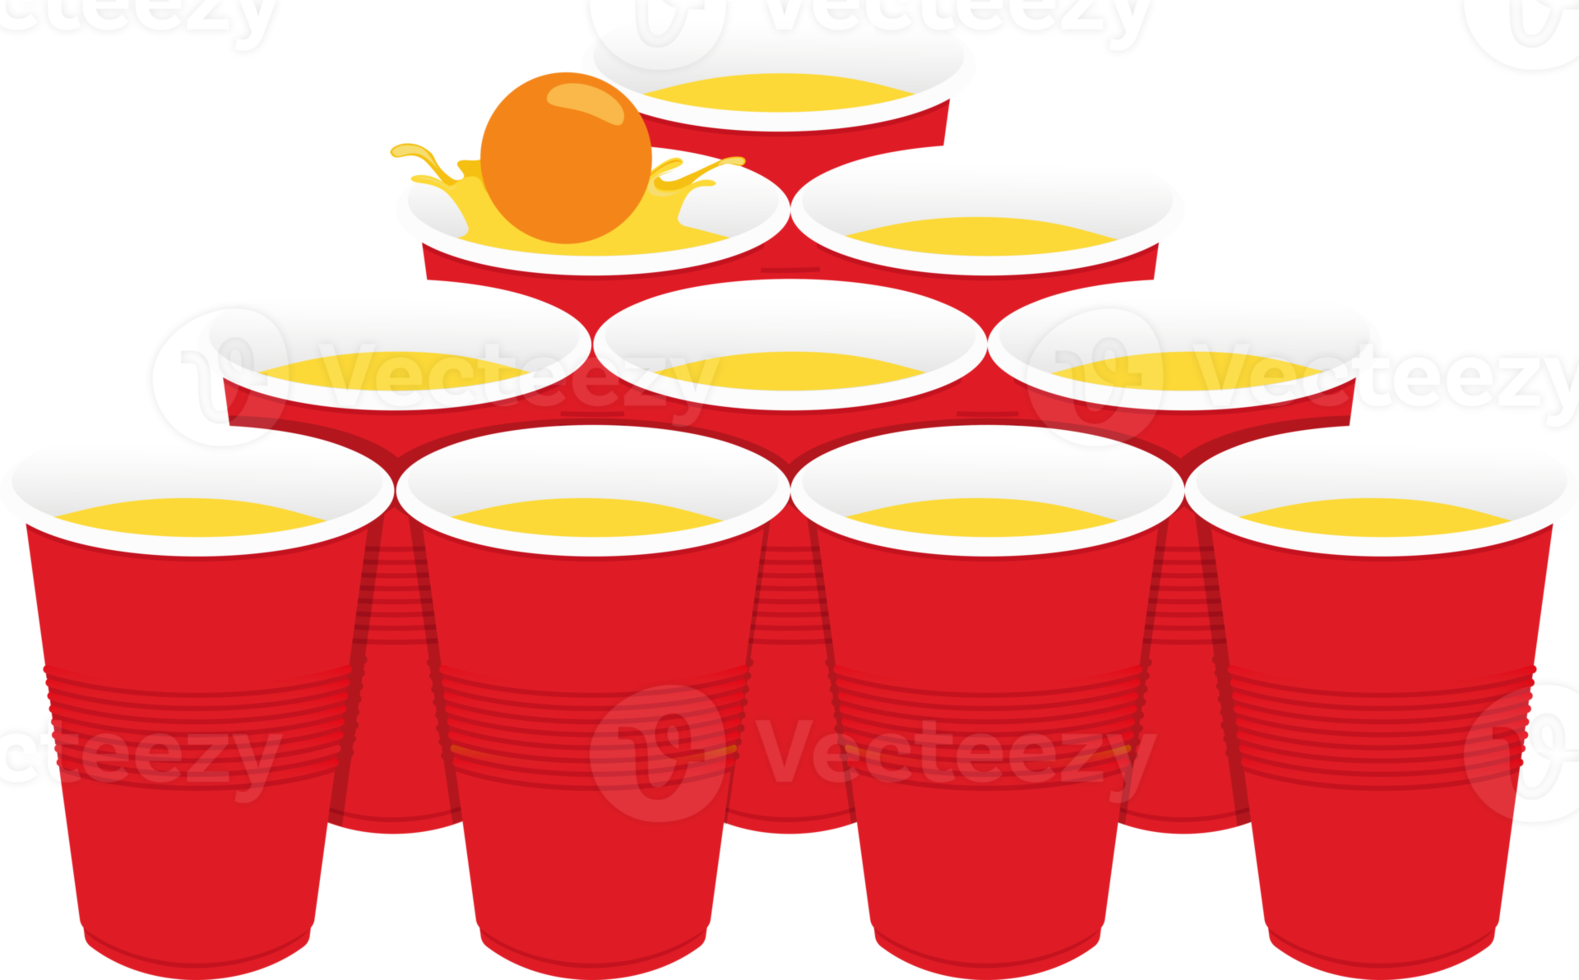 https://static.vecteezy.com/system/resources/previews/022/323/222/non_2x/red-beer-pong-plastic-cups-and-ball-with-splashing-traditional-party-drinking-game-png.png